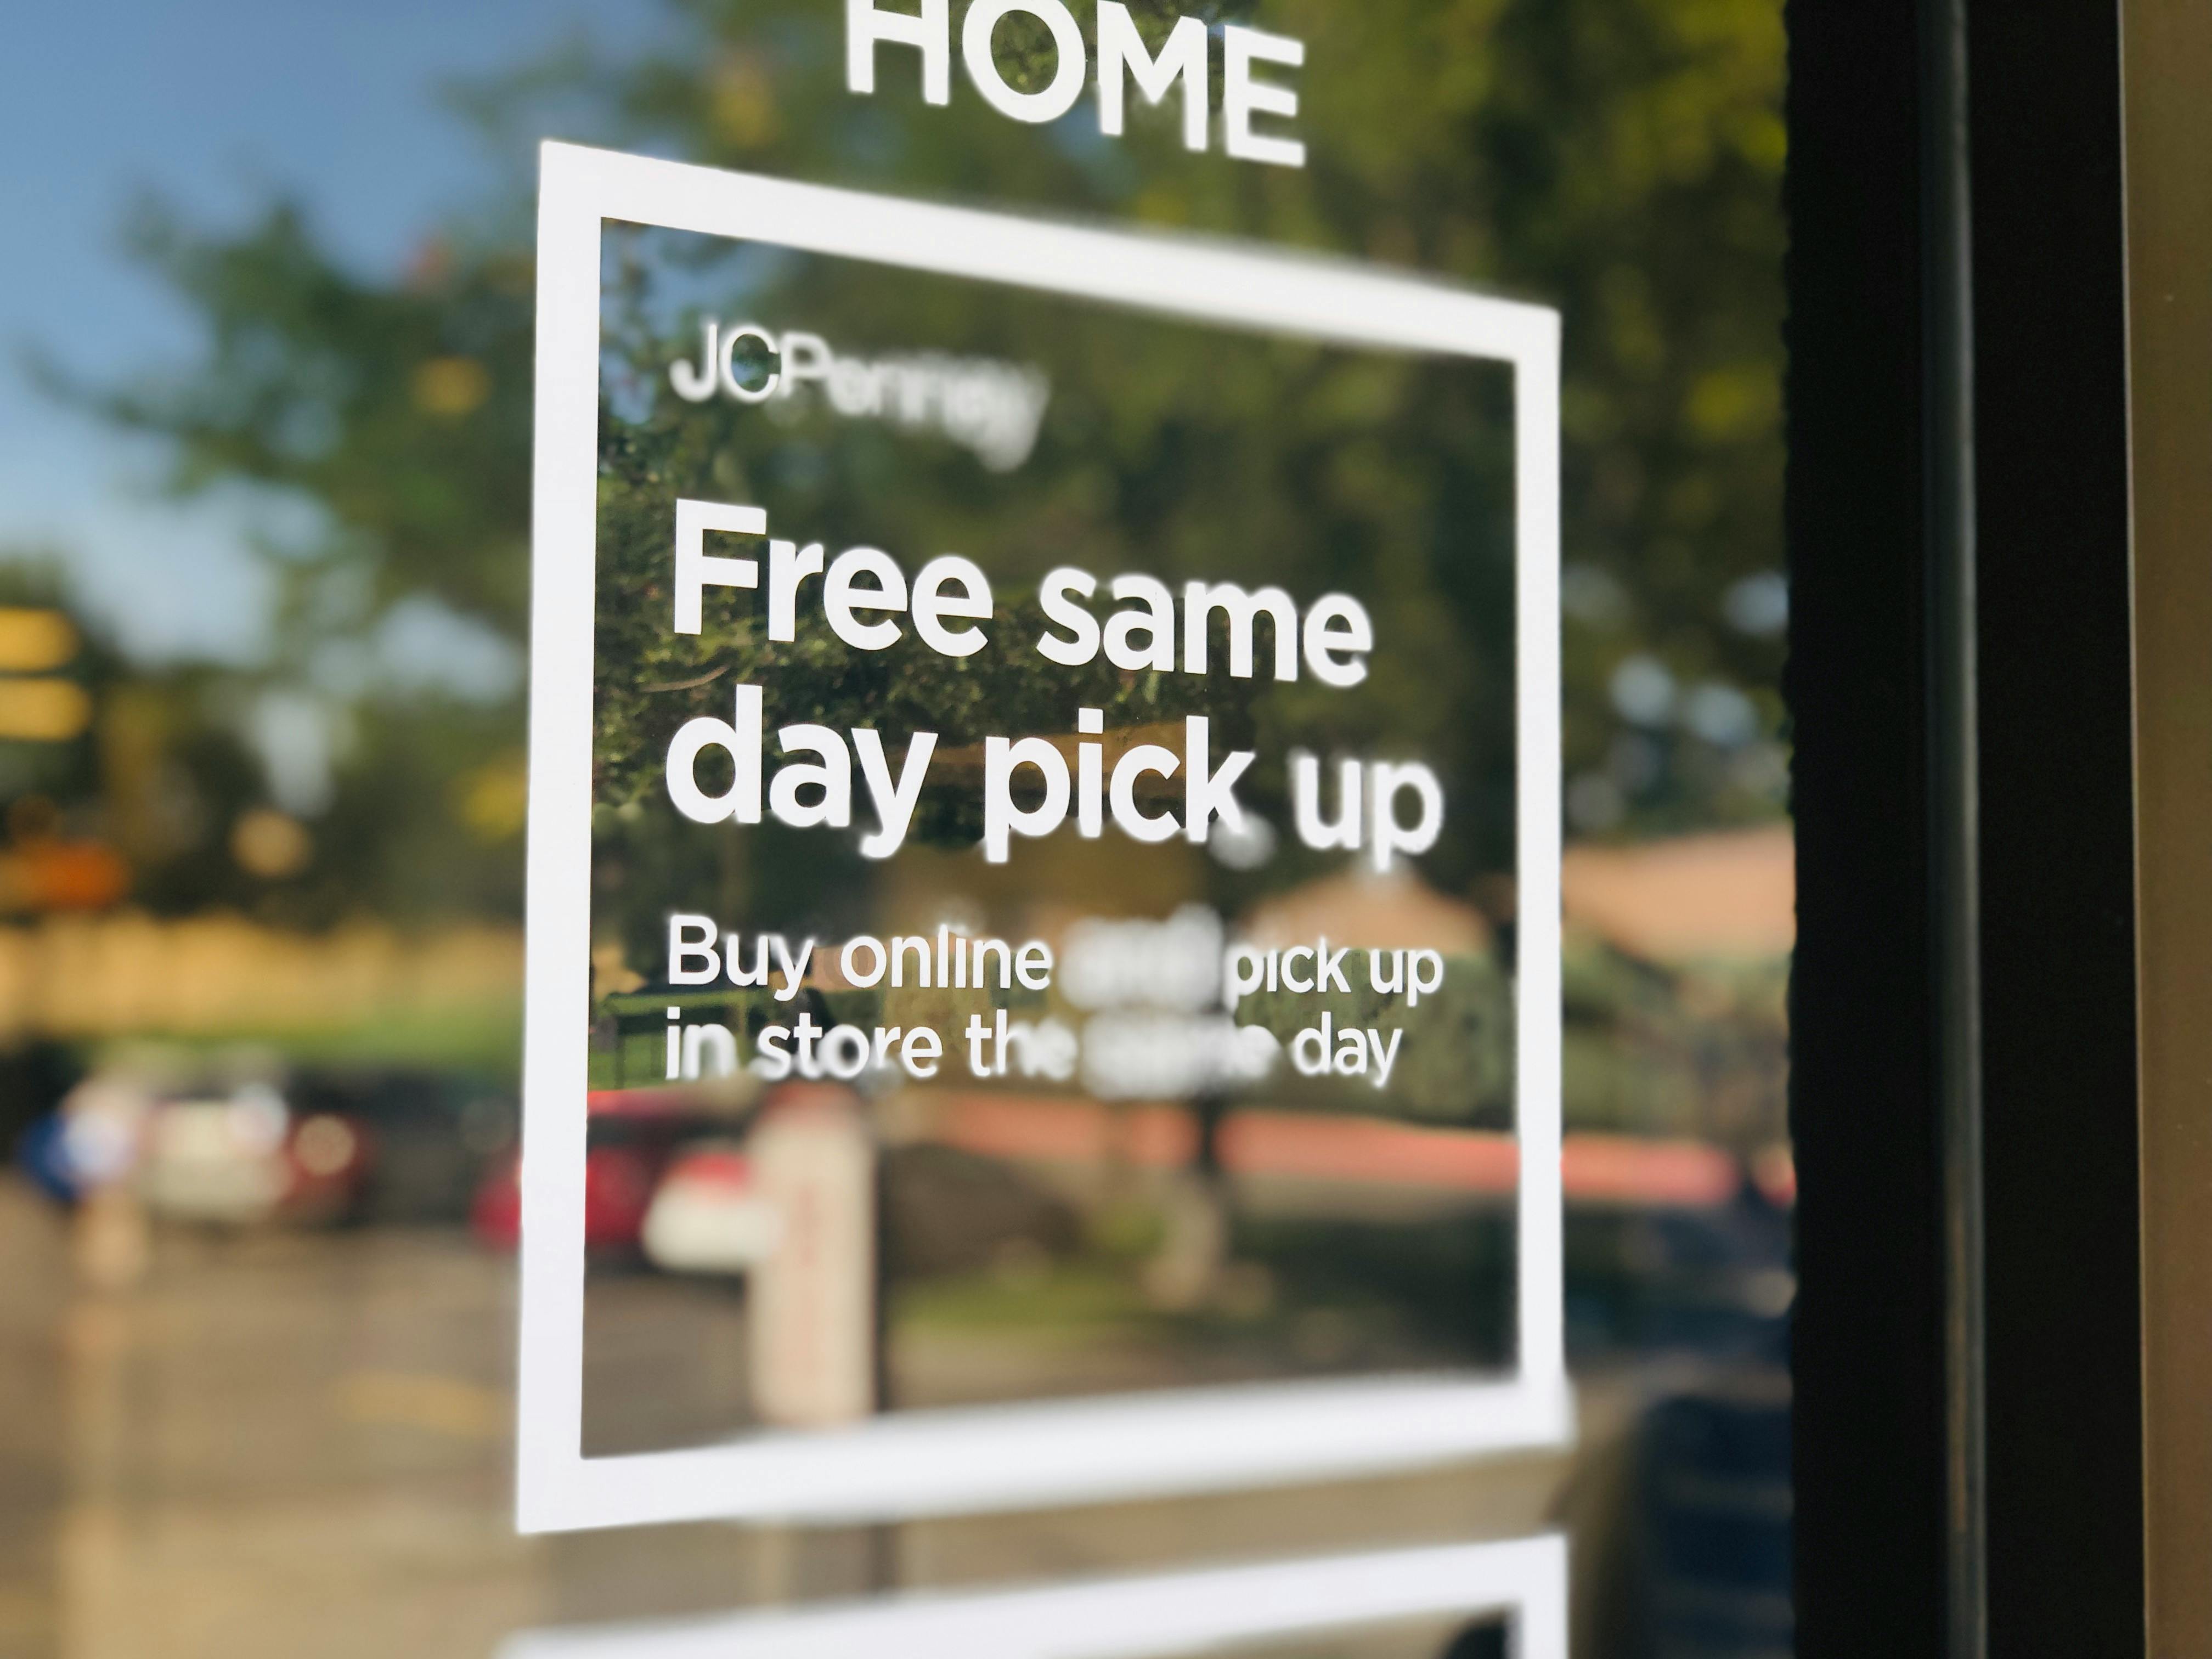 Online orders over $25 ship to a JCPenney store for free.